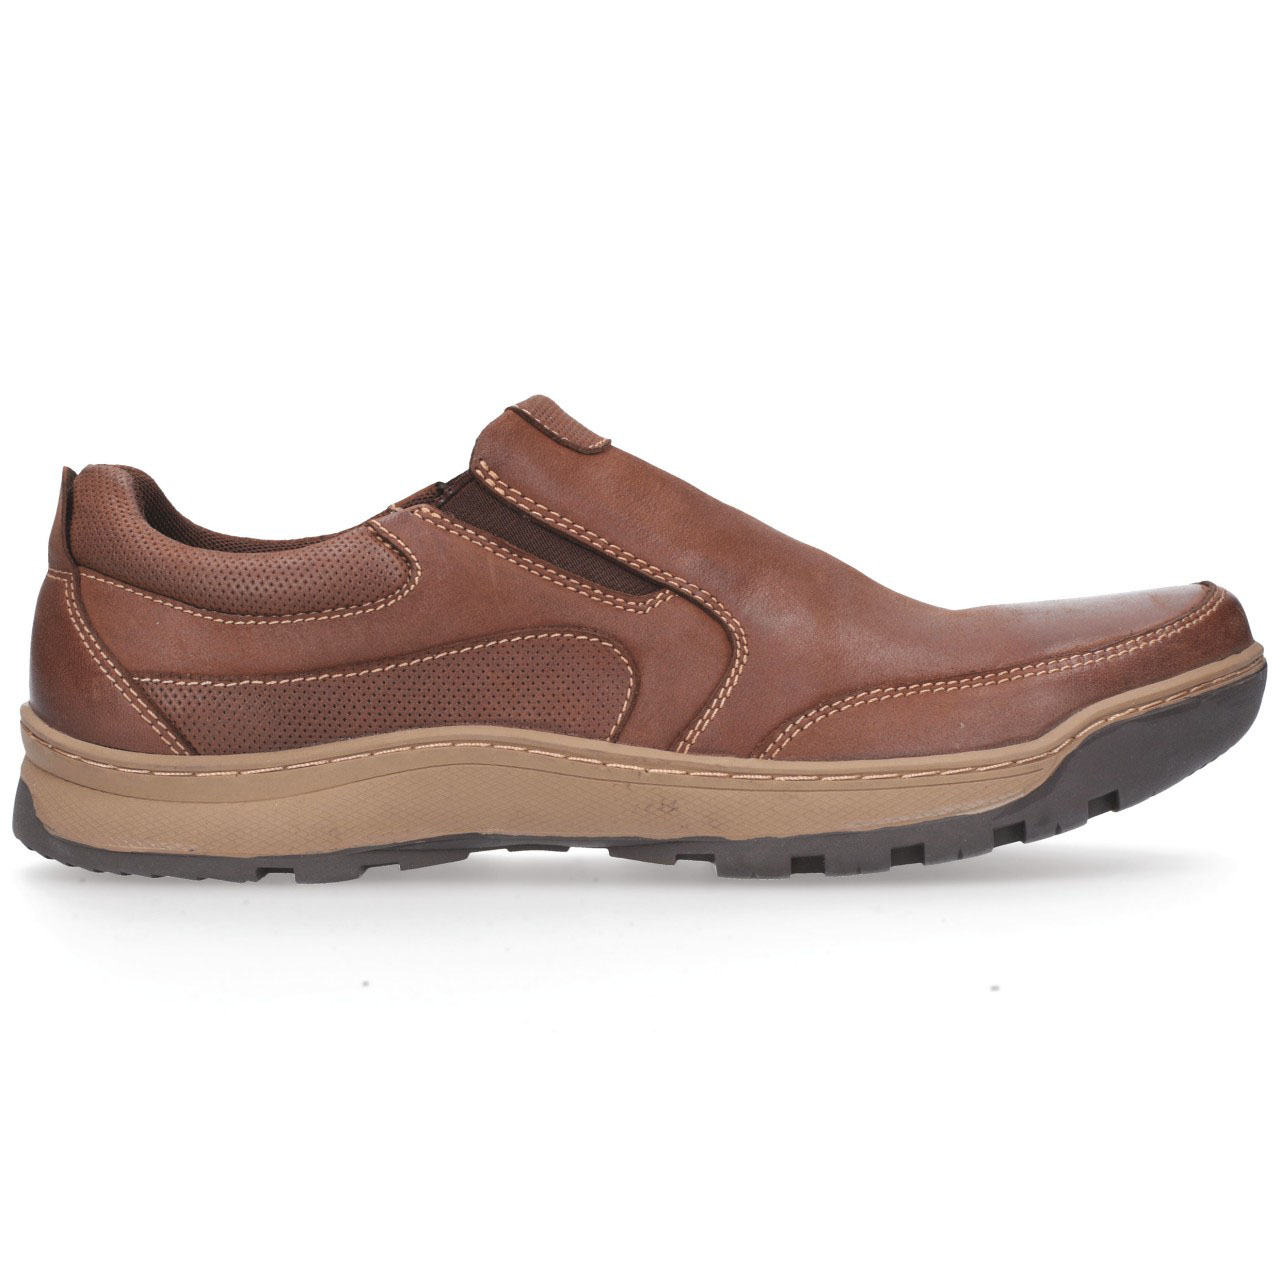 Hush Puppies Mens Loafers